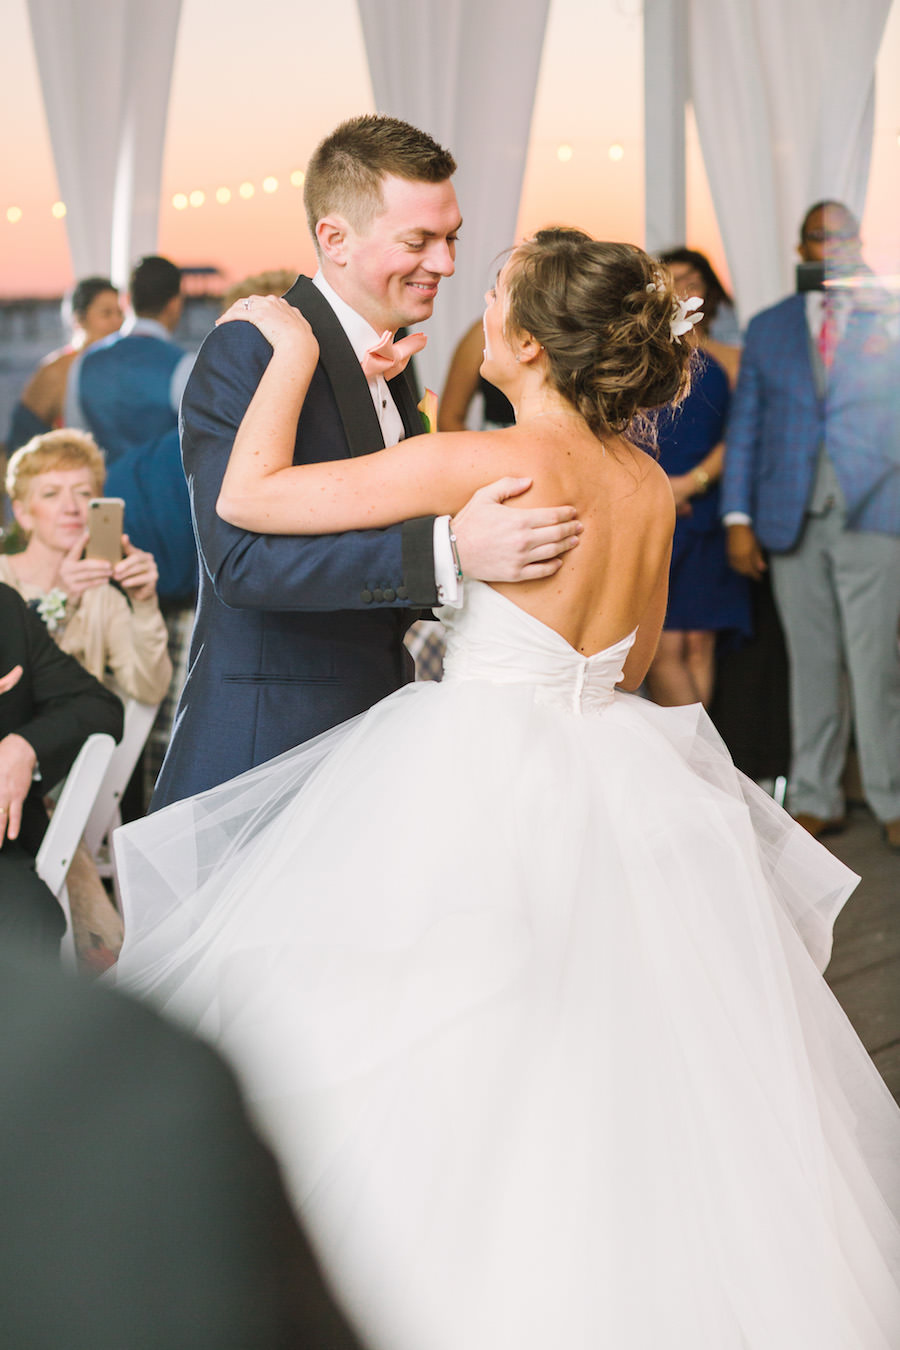 Bride and Groom First Dance Wedding Portrait | Clearwater Hair Stylist Michele Renee The Studio | Tampa Bay Wedding Venue Hilton Clearwater Beach